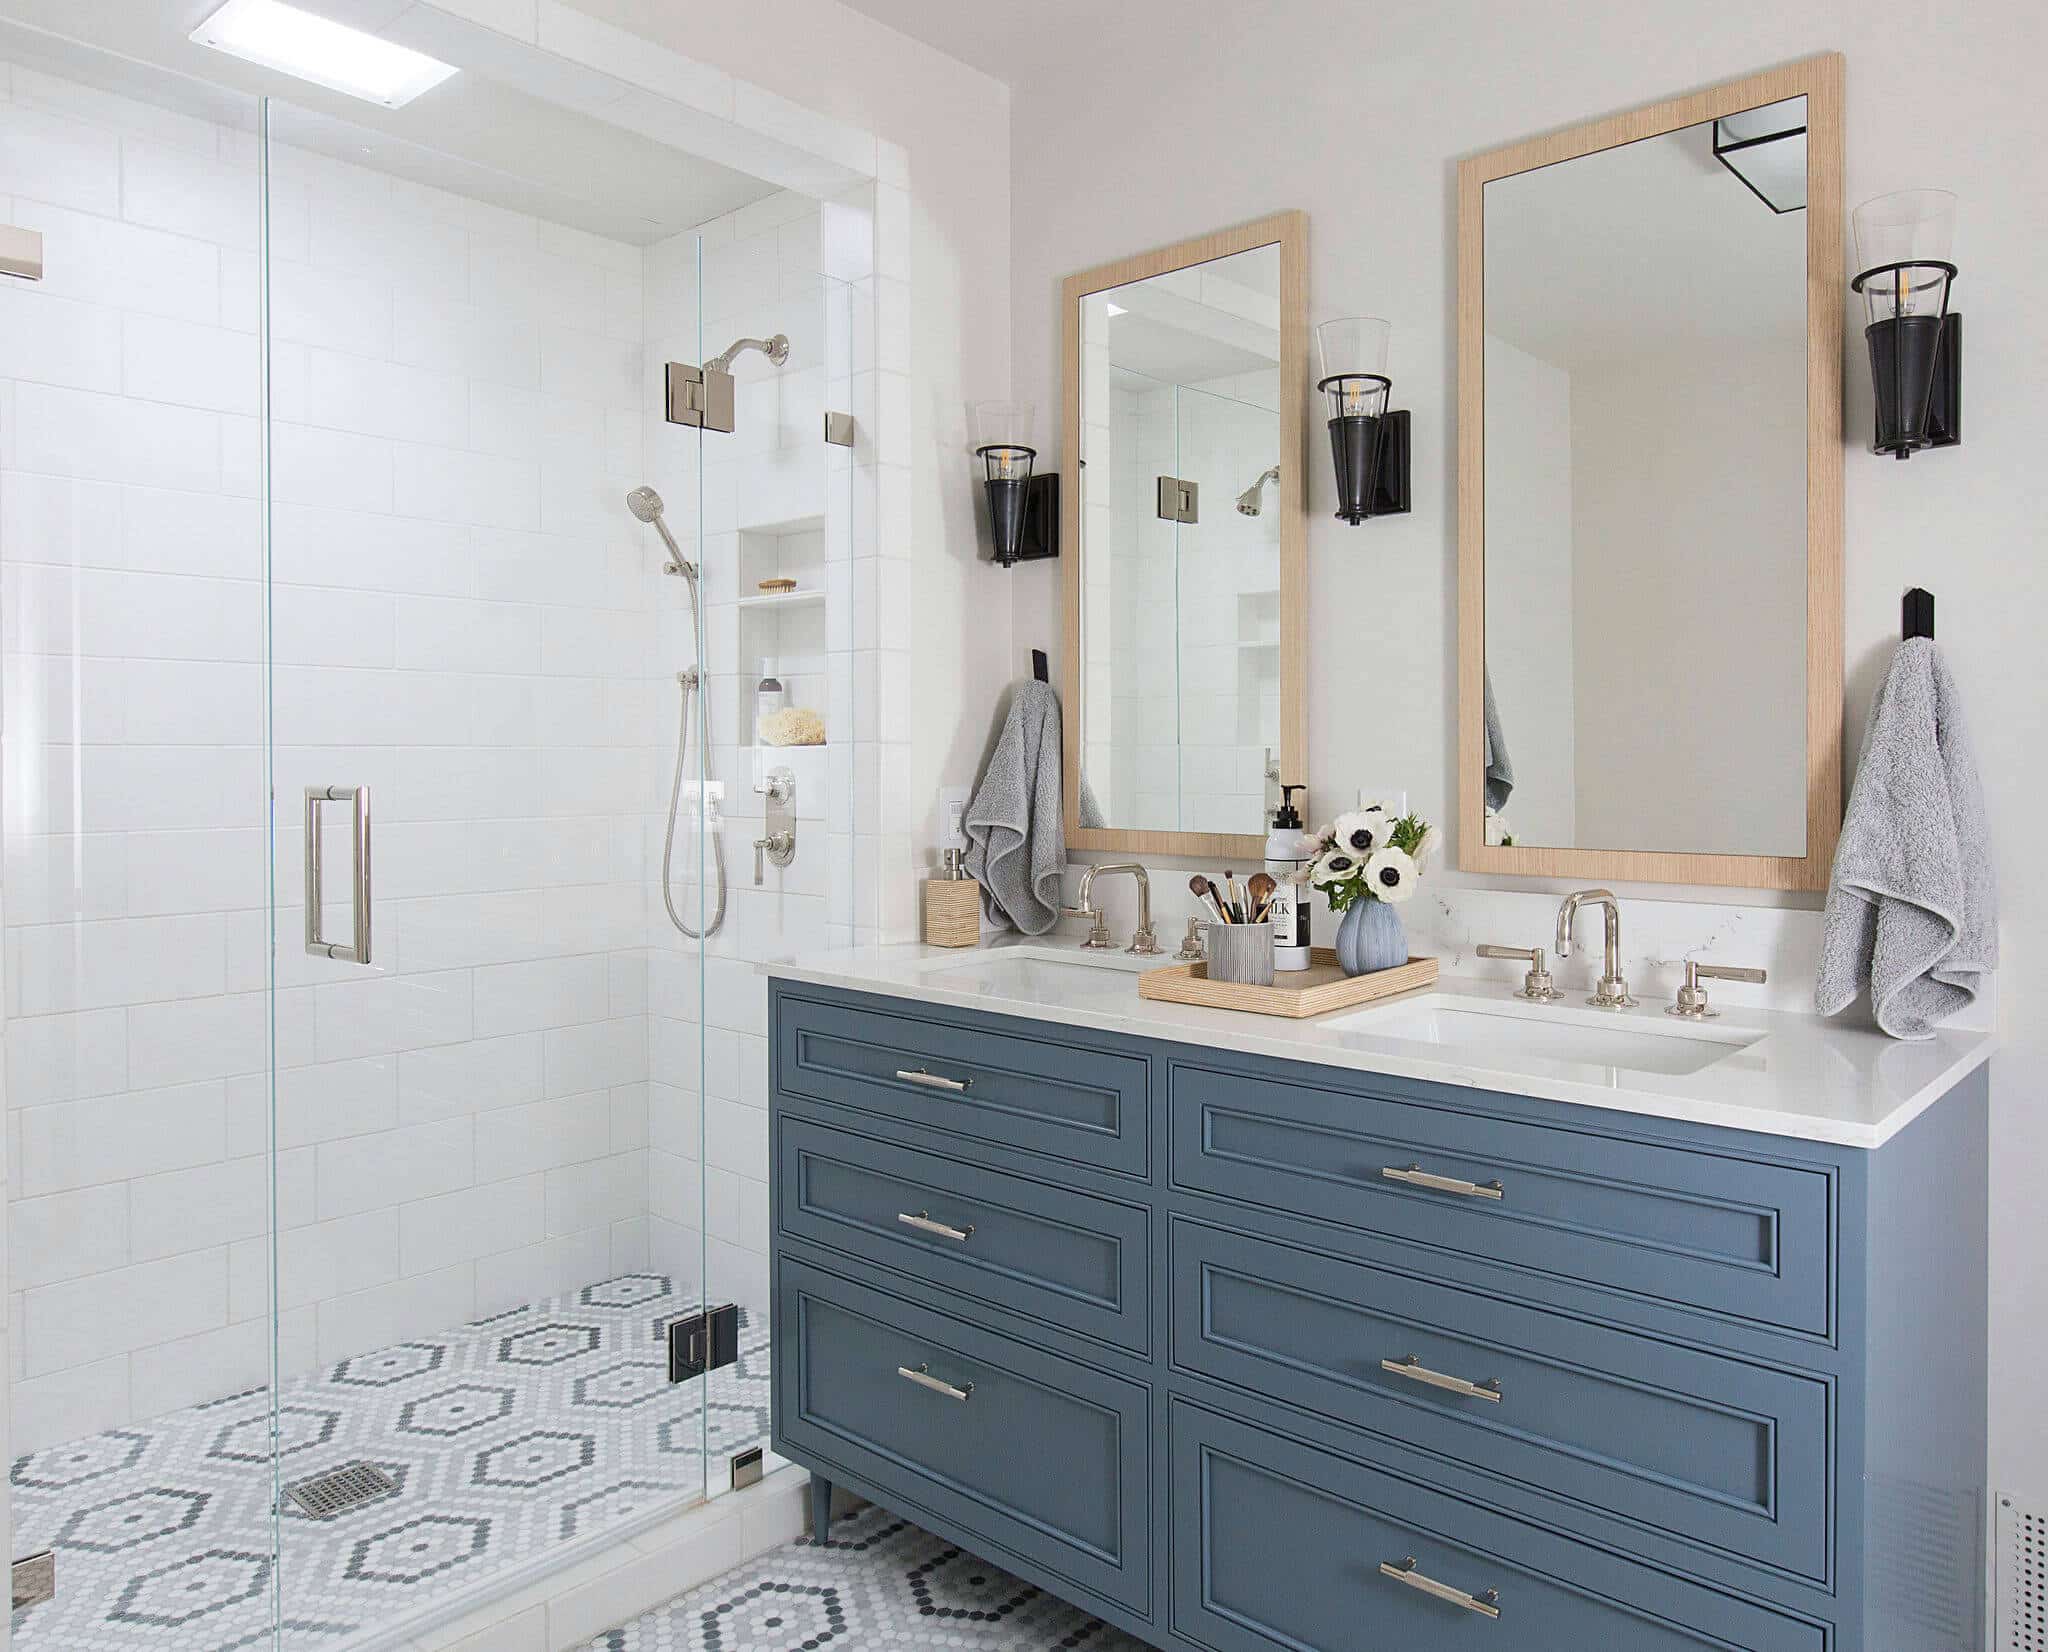 How Often Should A Bathroom Be Remodeled? - Decor Snob